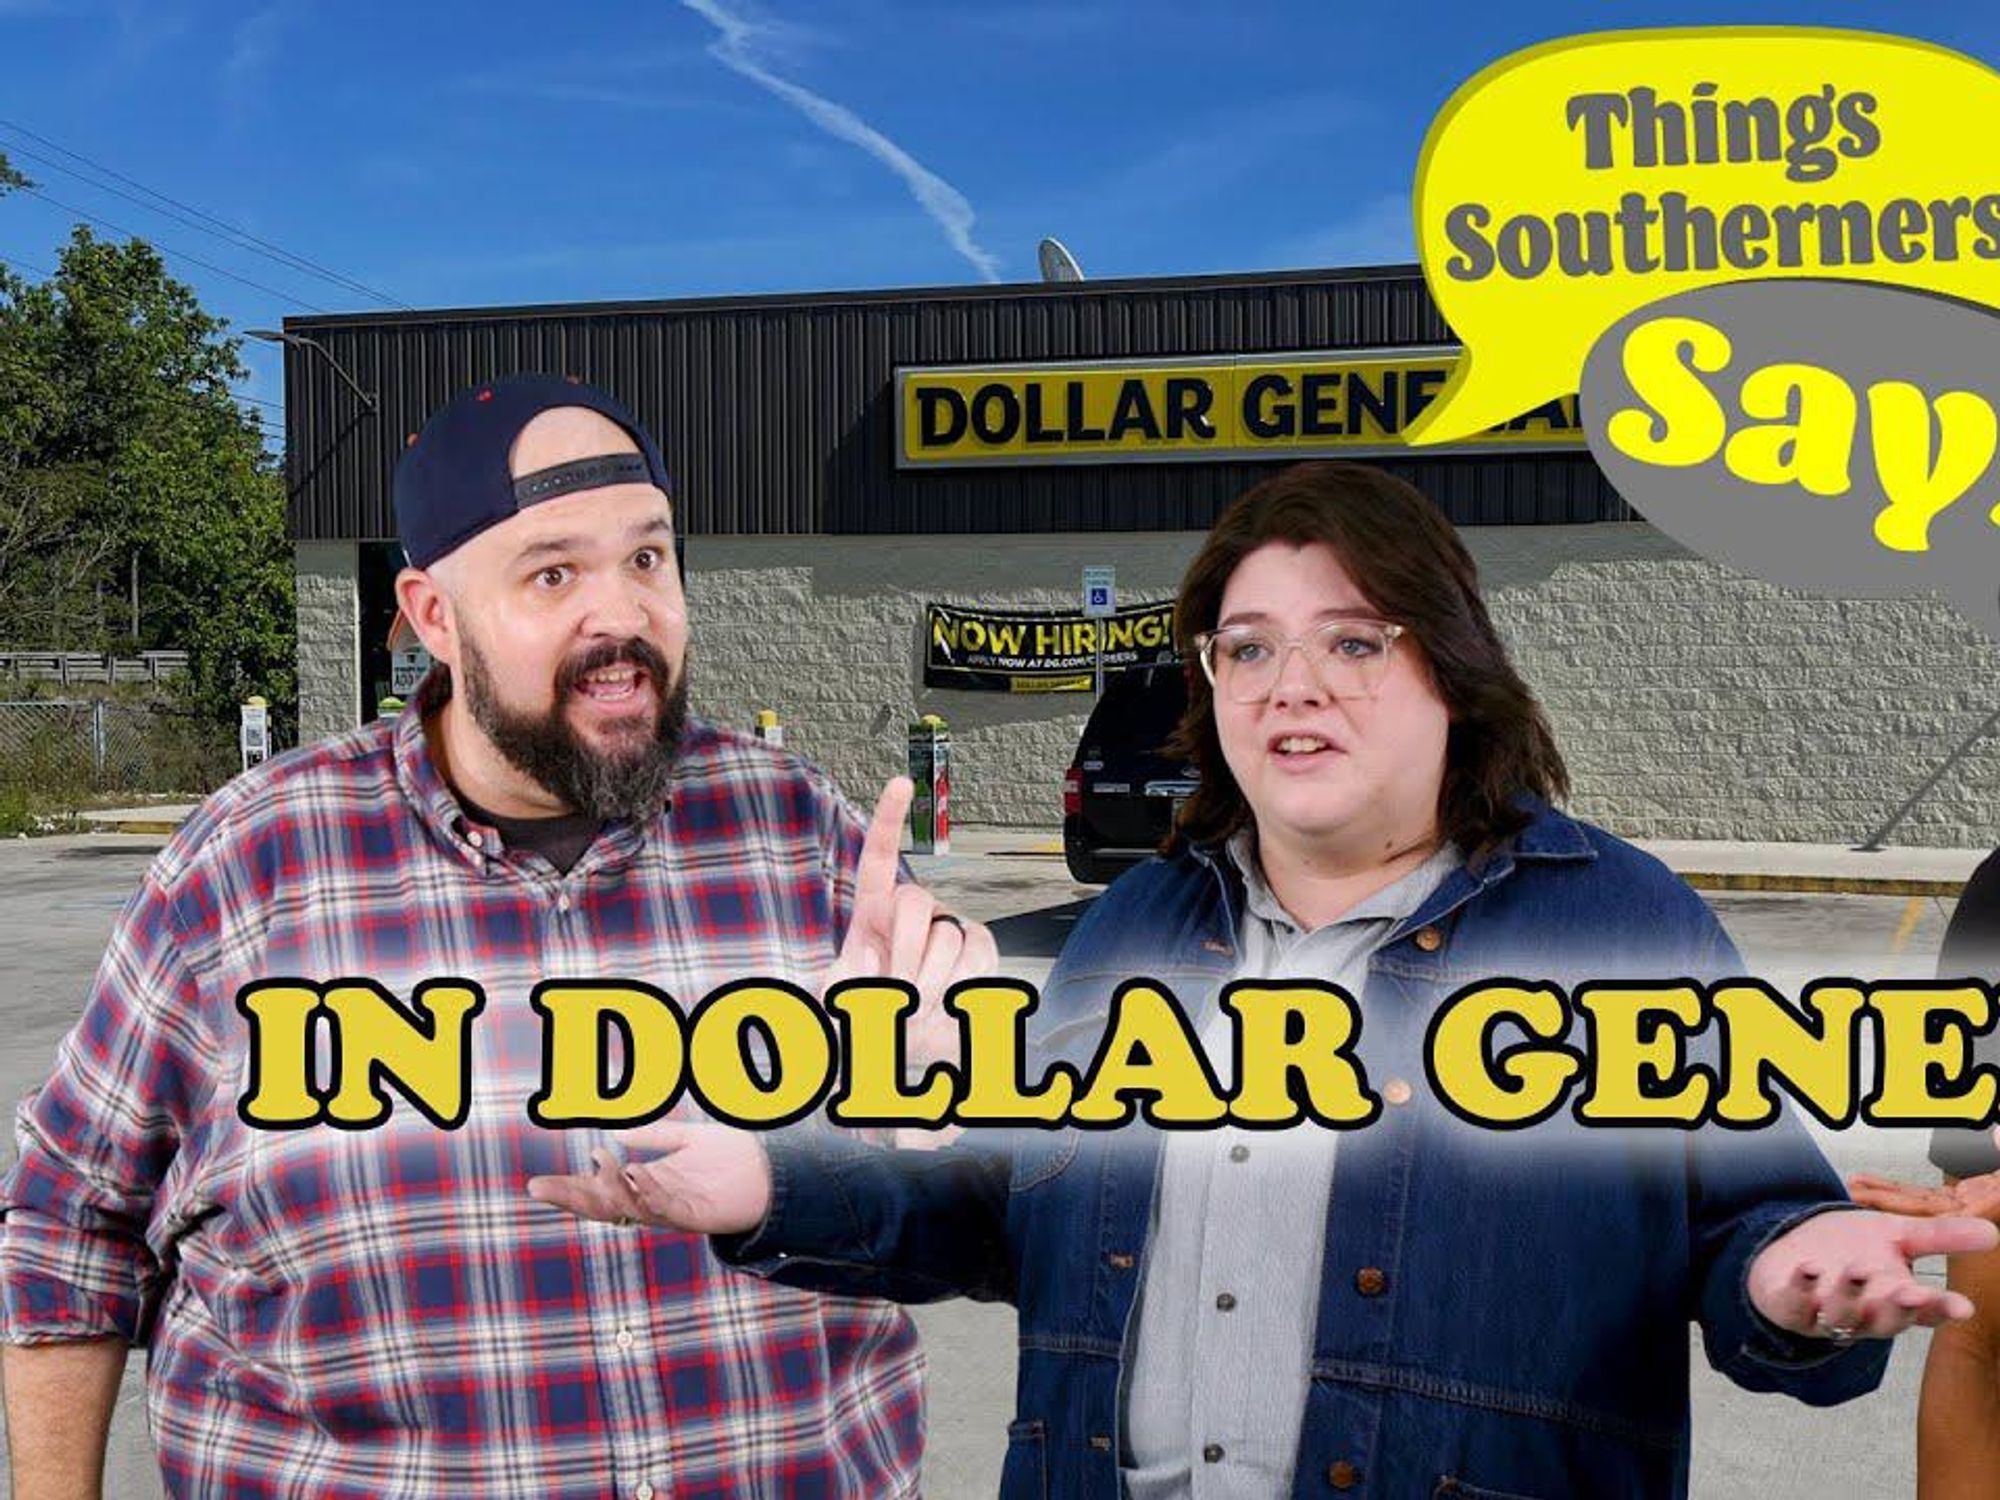 Replying to @suszig I did the thing! How to use the dollar store